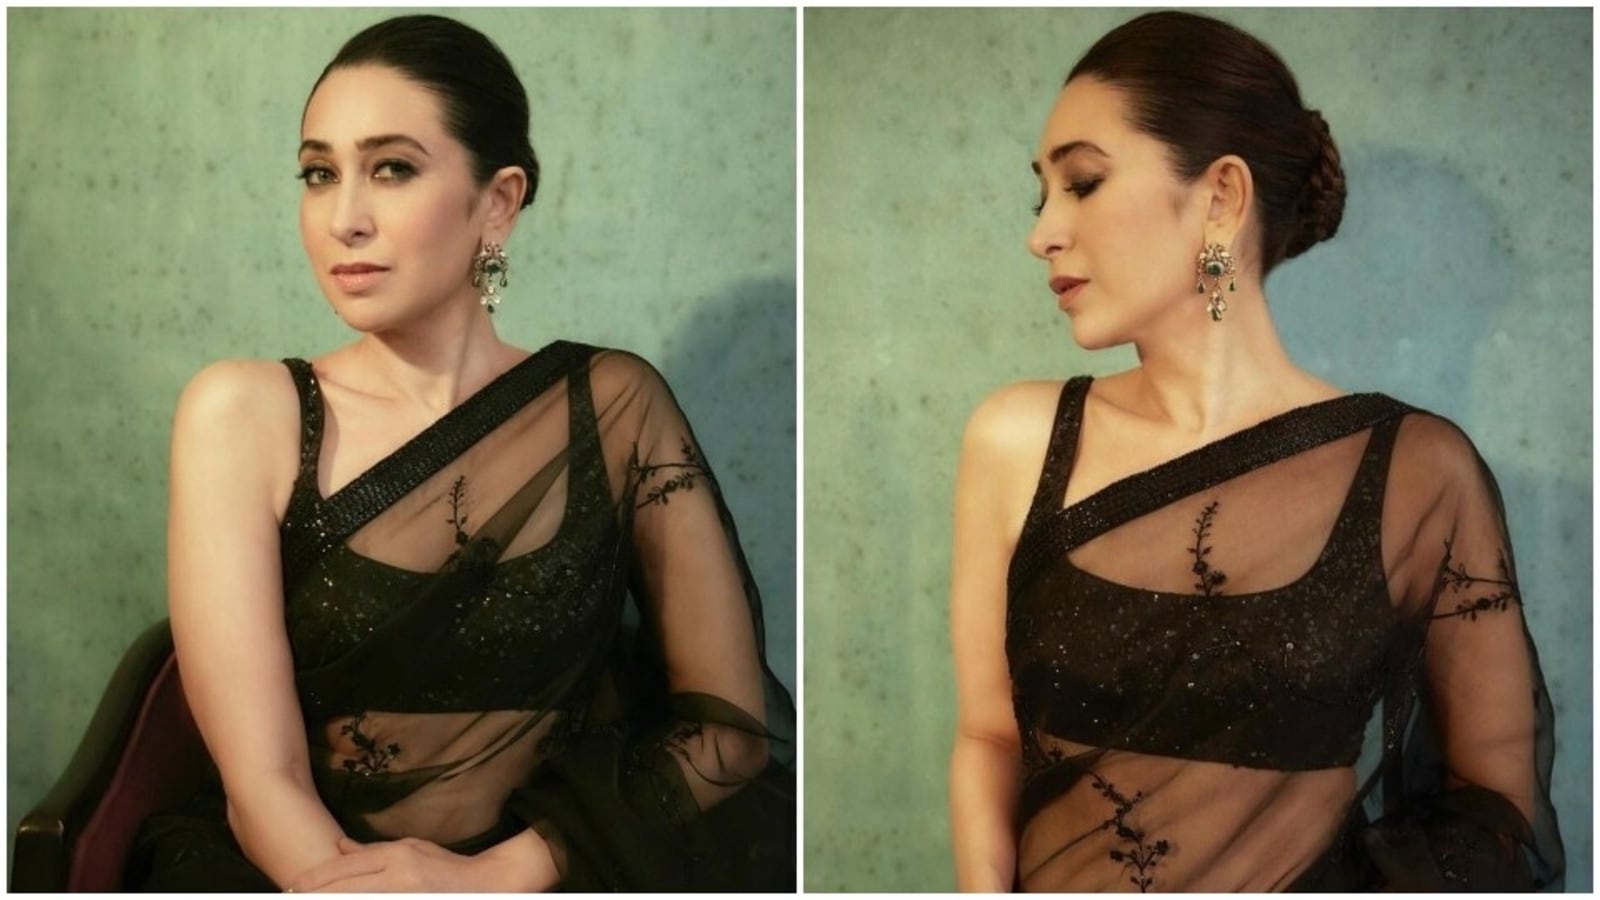 Karisma Kapoor in Sabyasachi saree and shimmery blouse favours the bold  black | Fashion Trends - Hindustan Times